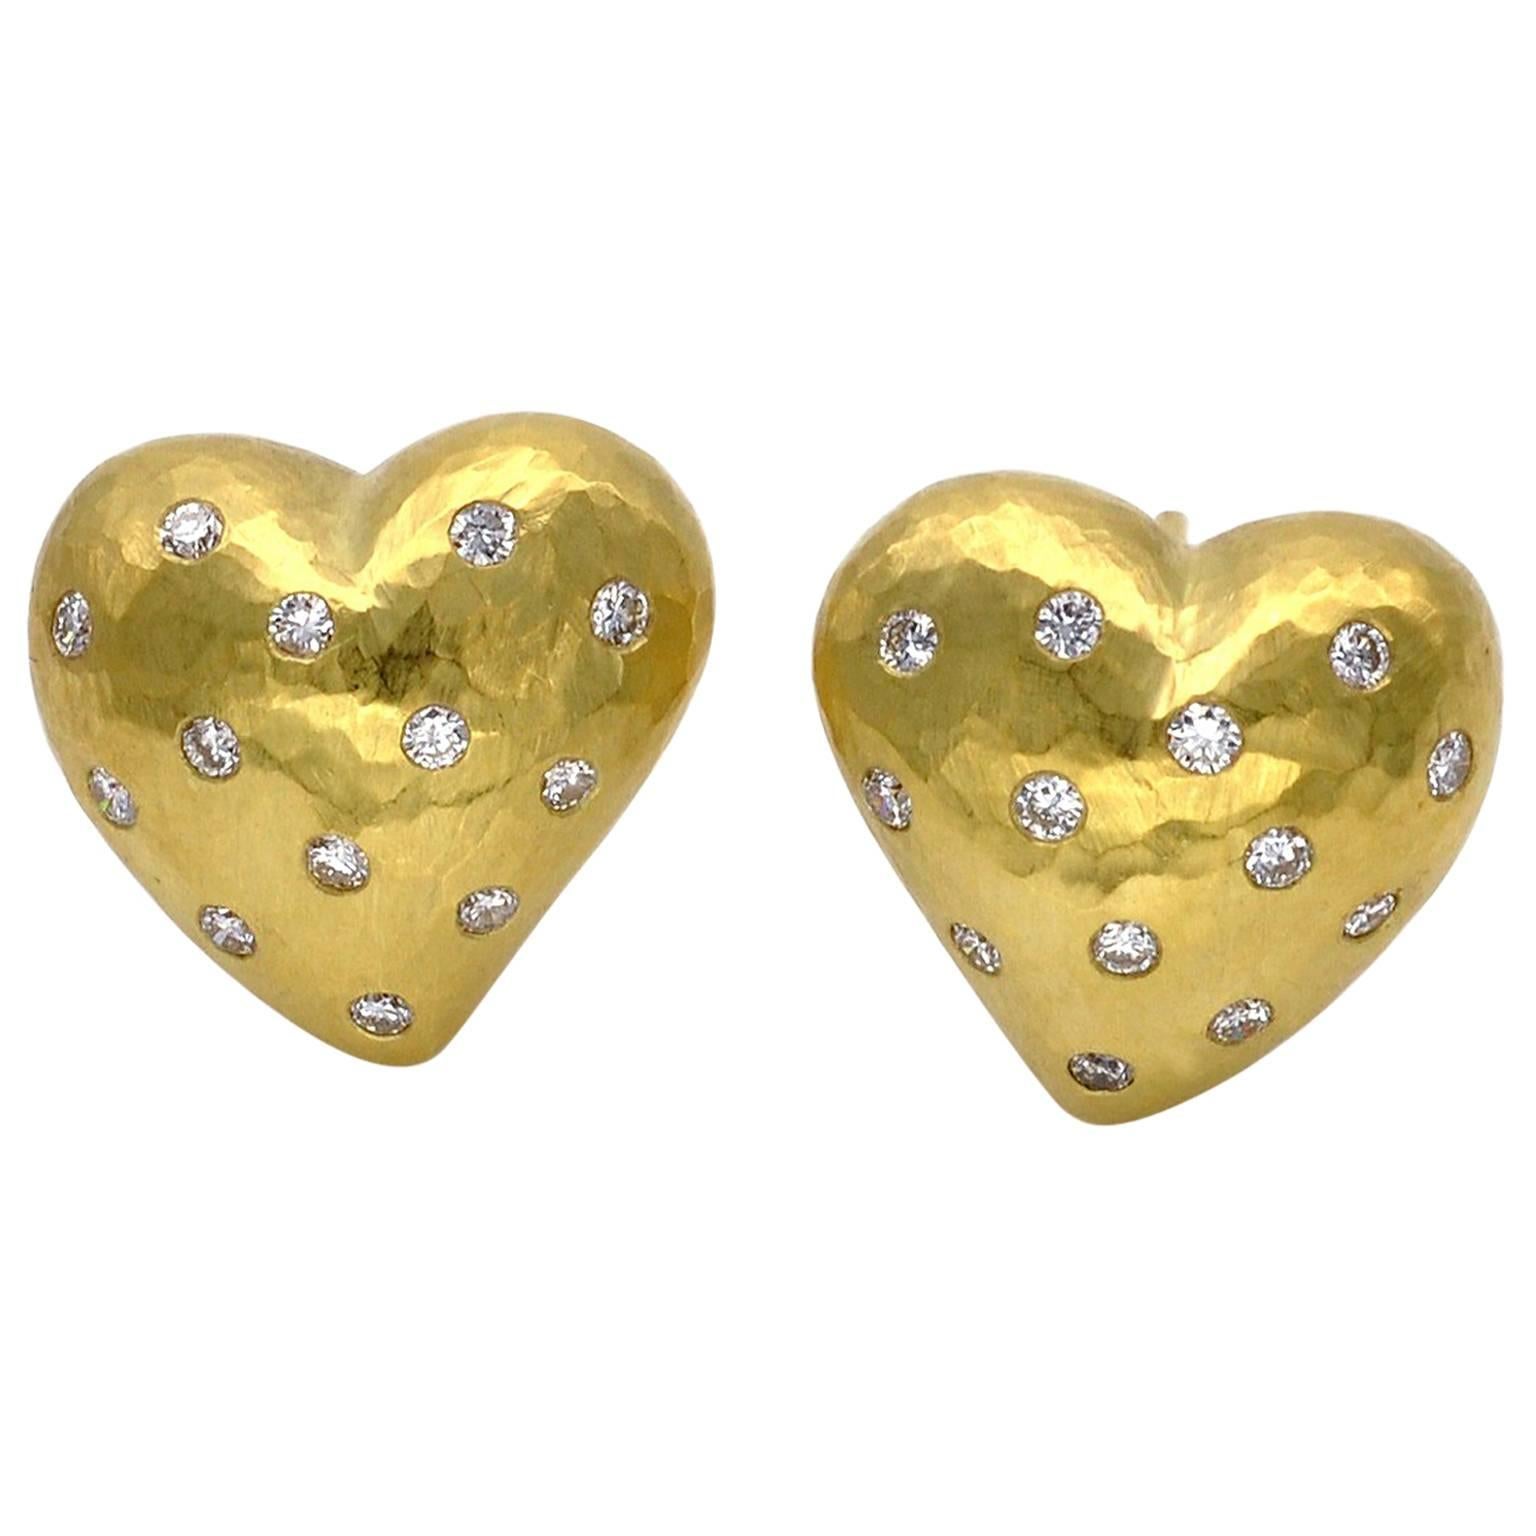  Diamond and Yellow-Gold Heart-Shaped Earrings